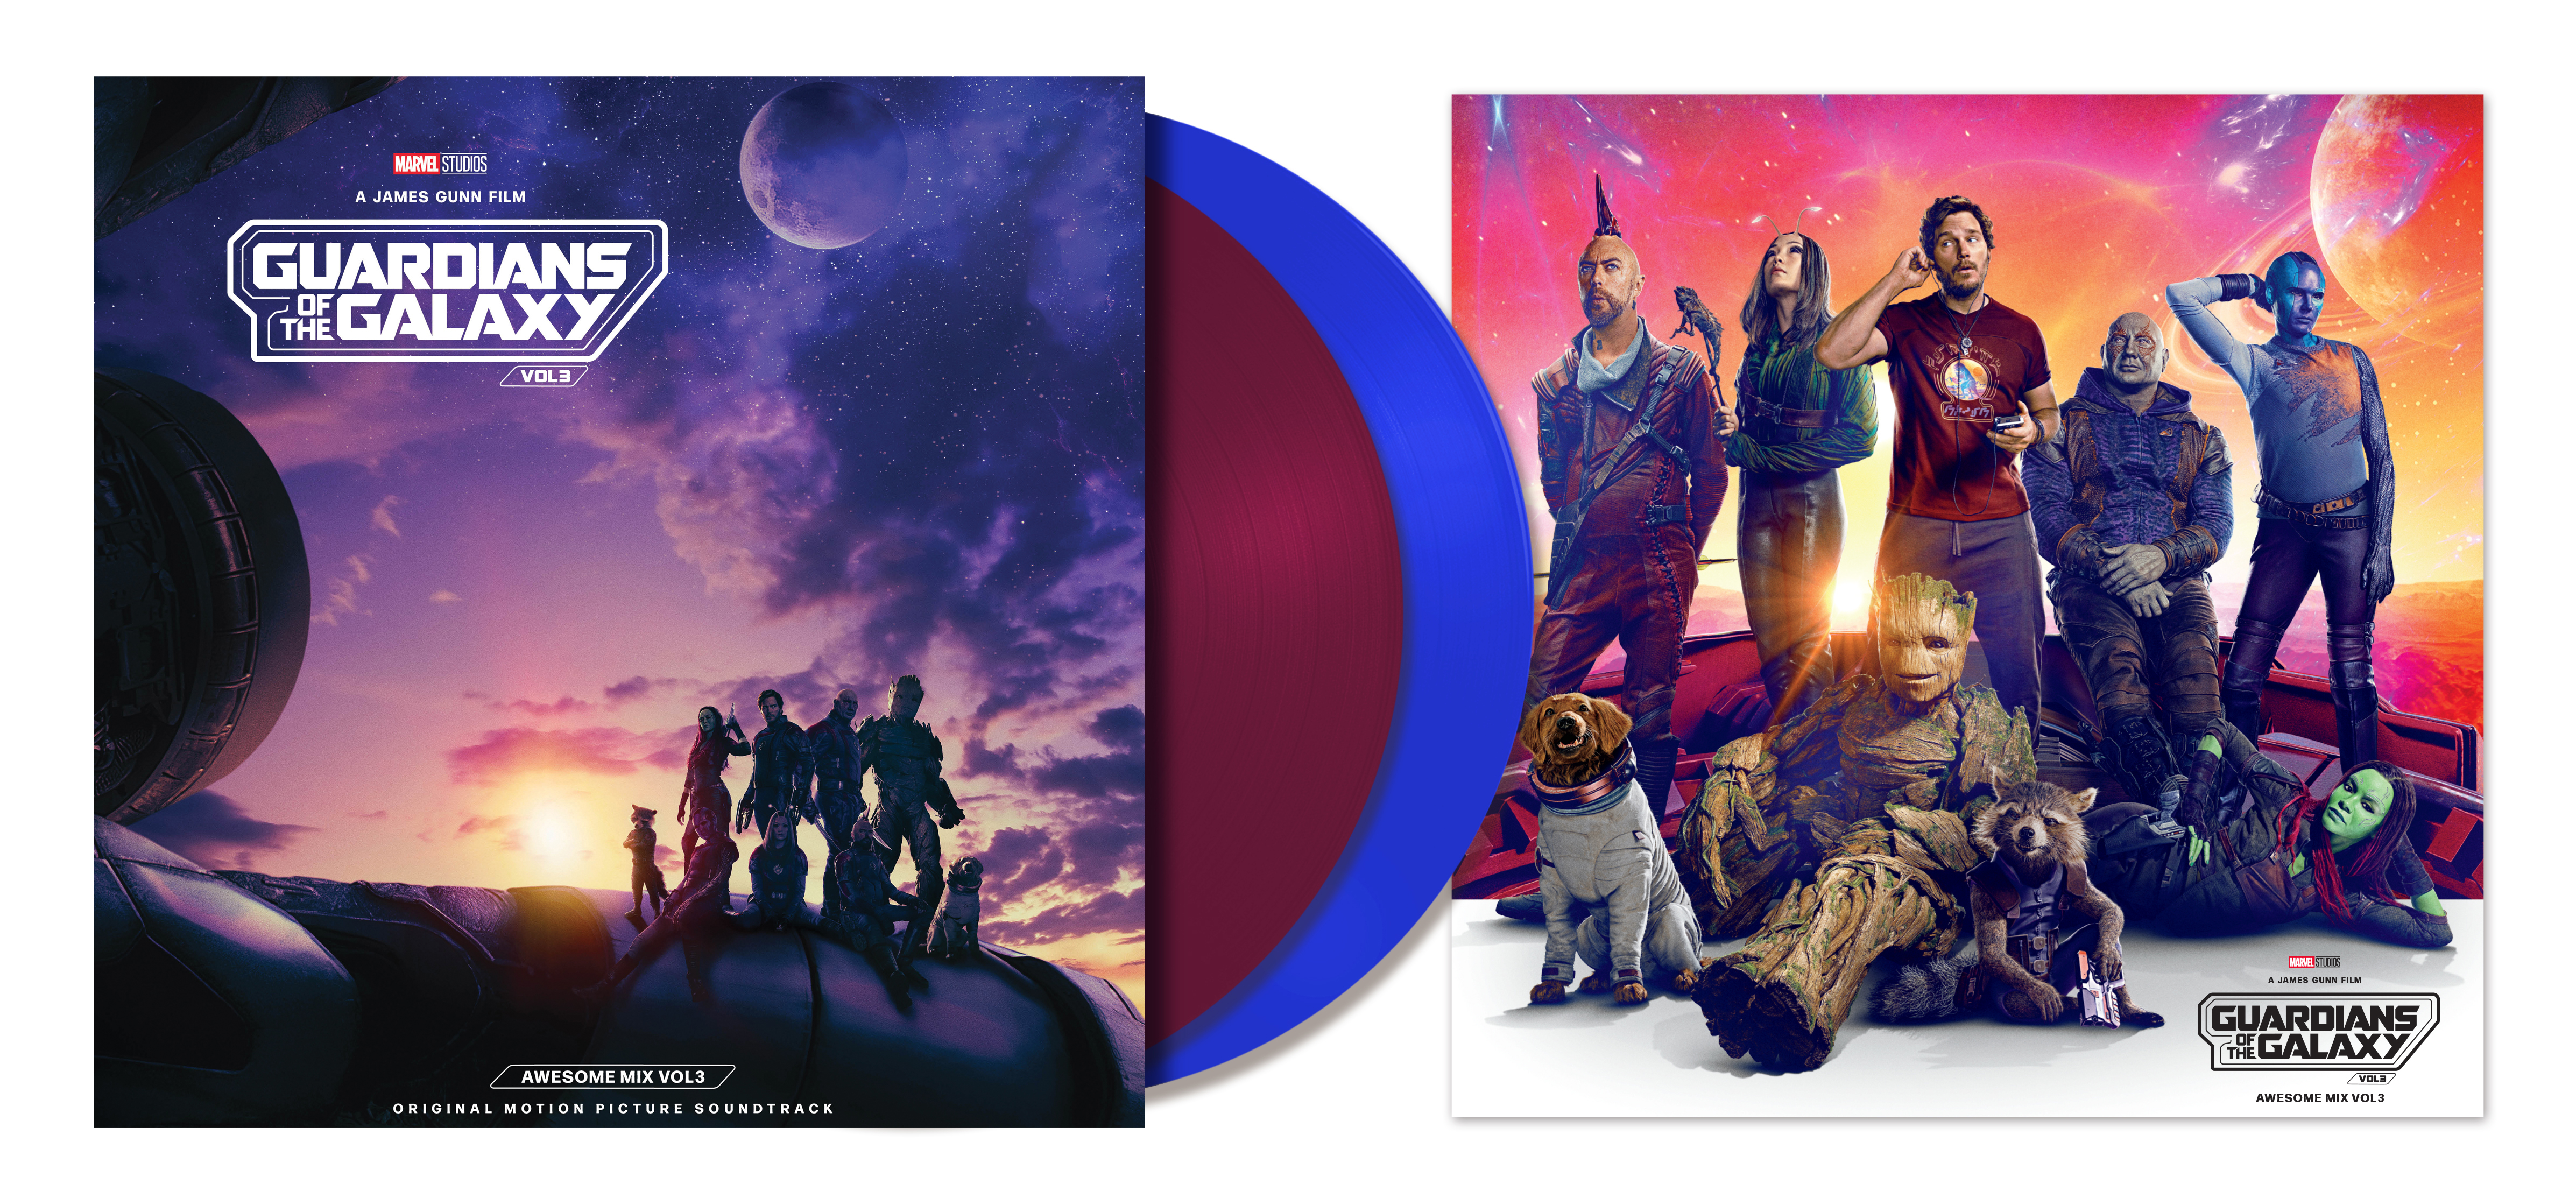 Exklusive Awesome (Vinyl) The Poster Blue Vol. Various Vol. Of - Edition + - Mix 3 Guardians (2LP) 3: Galaxy